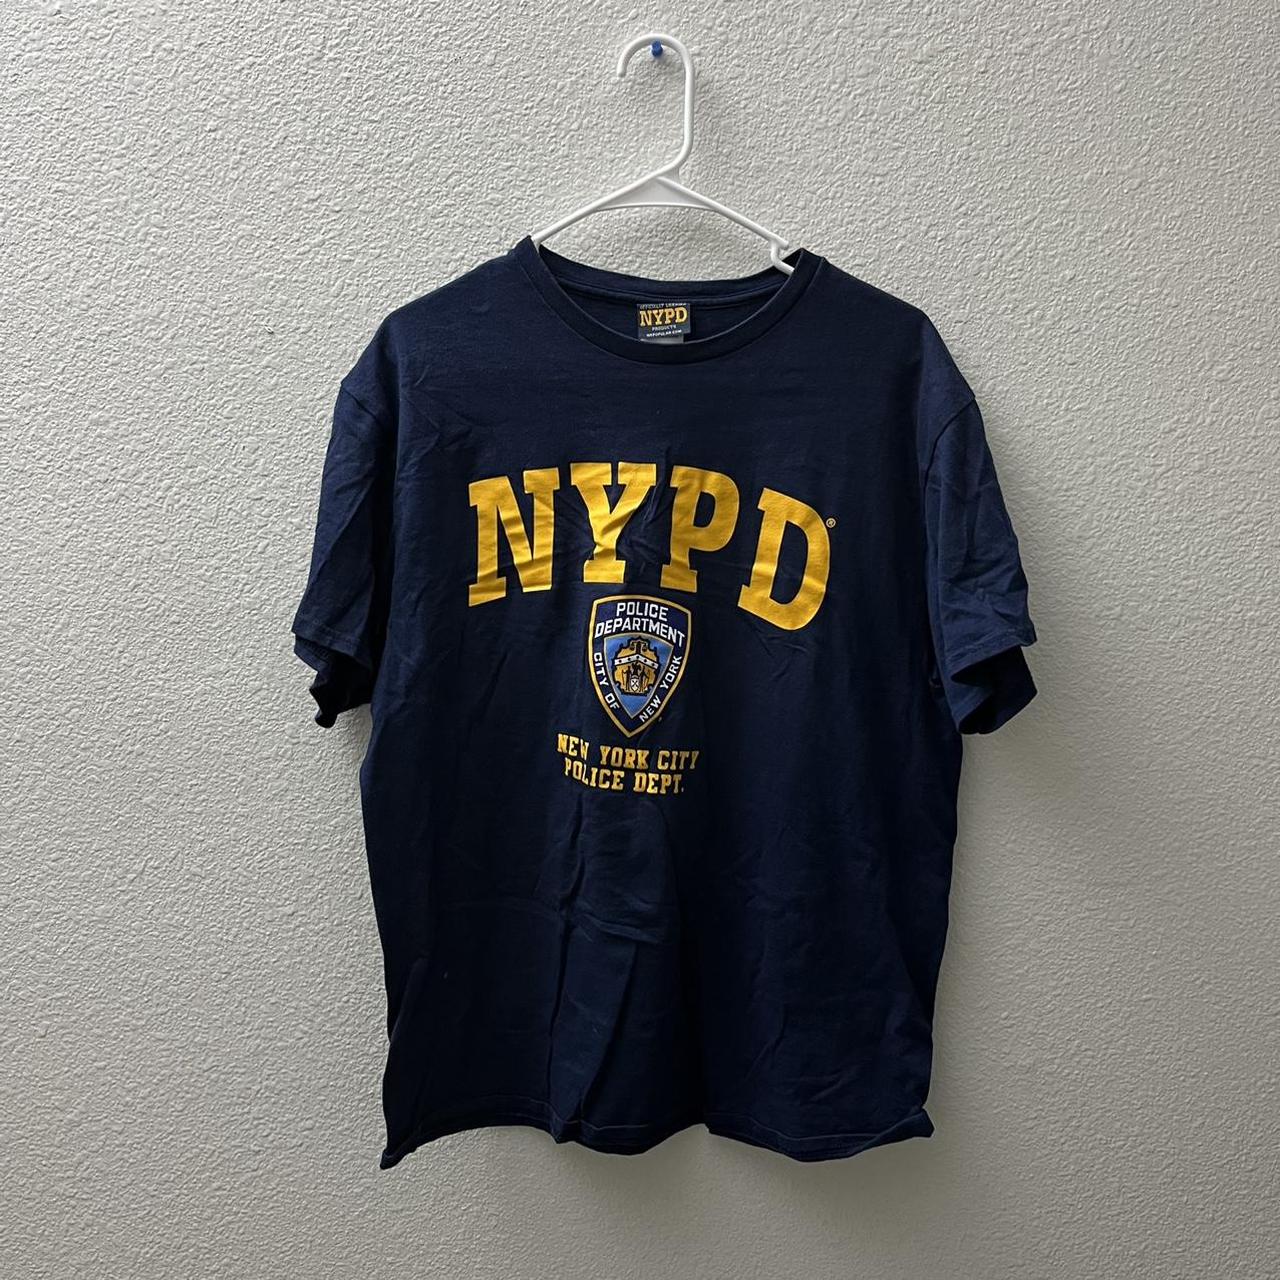 NYPD New York Police Department Shirt Size... - Depop